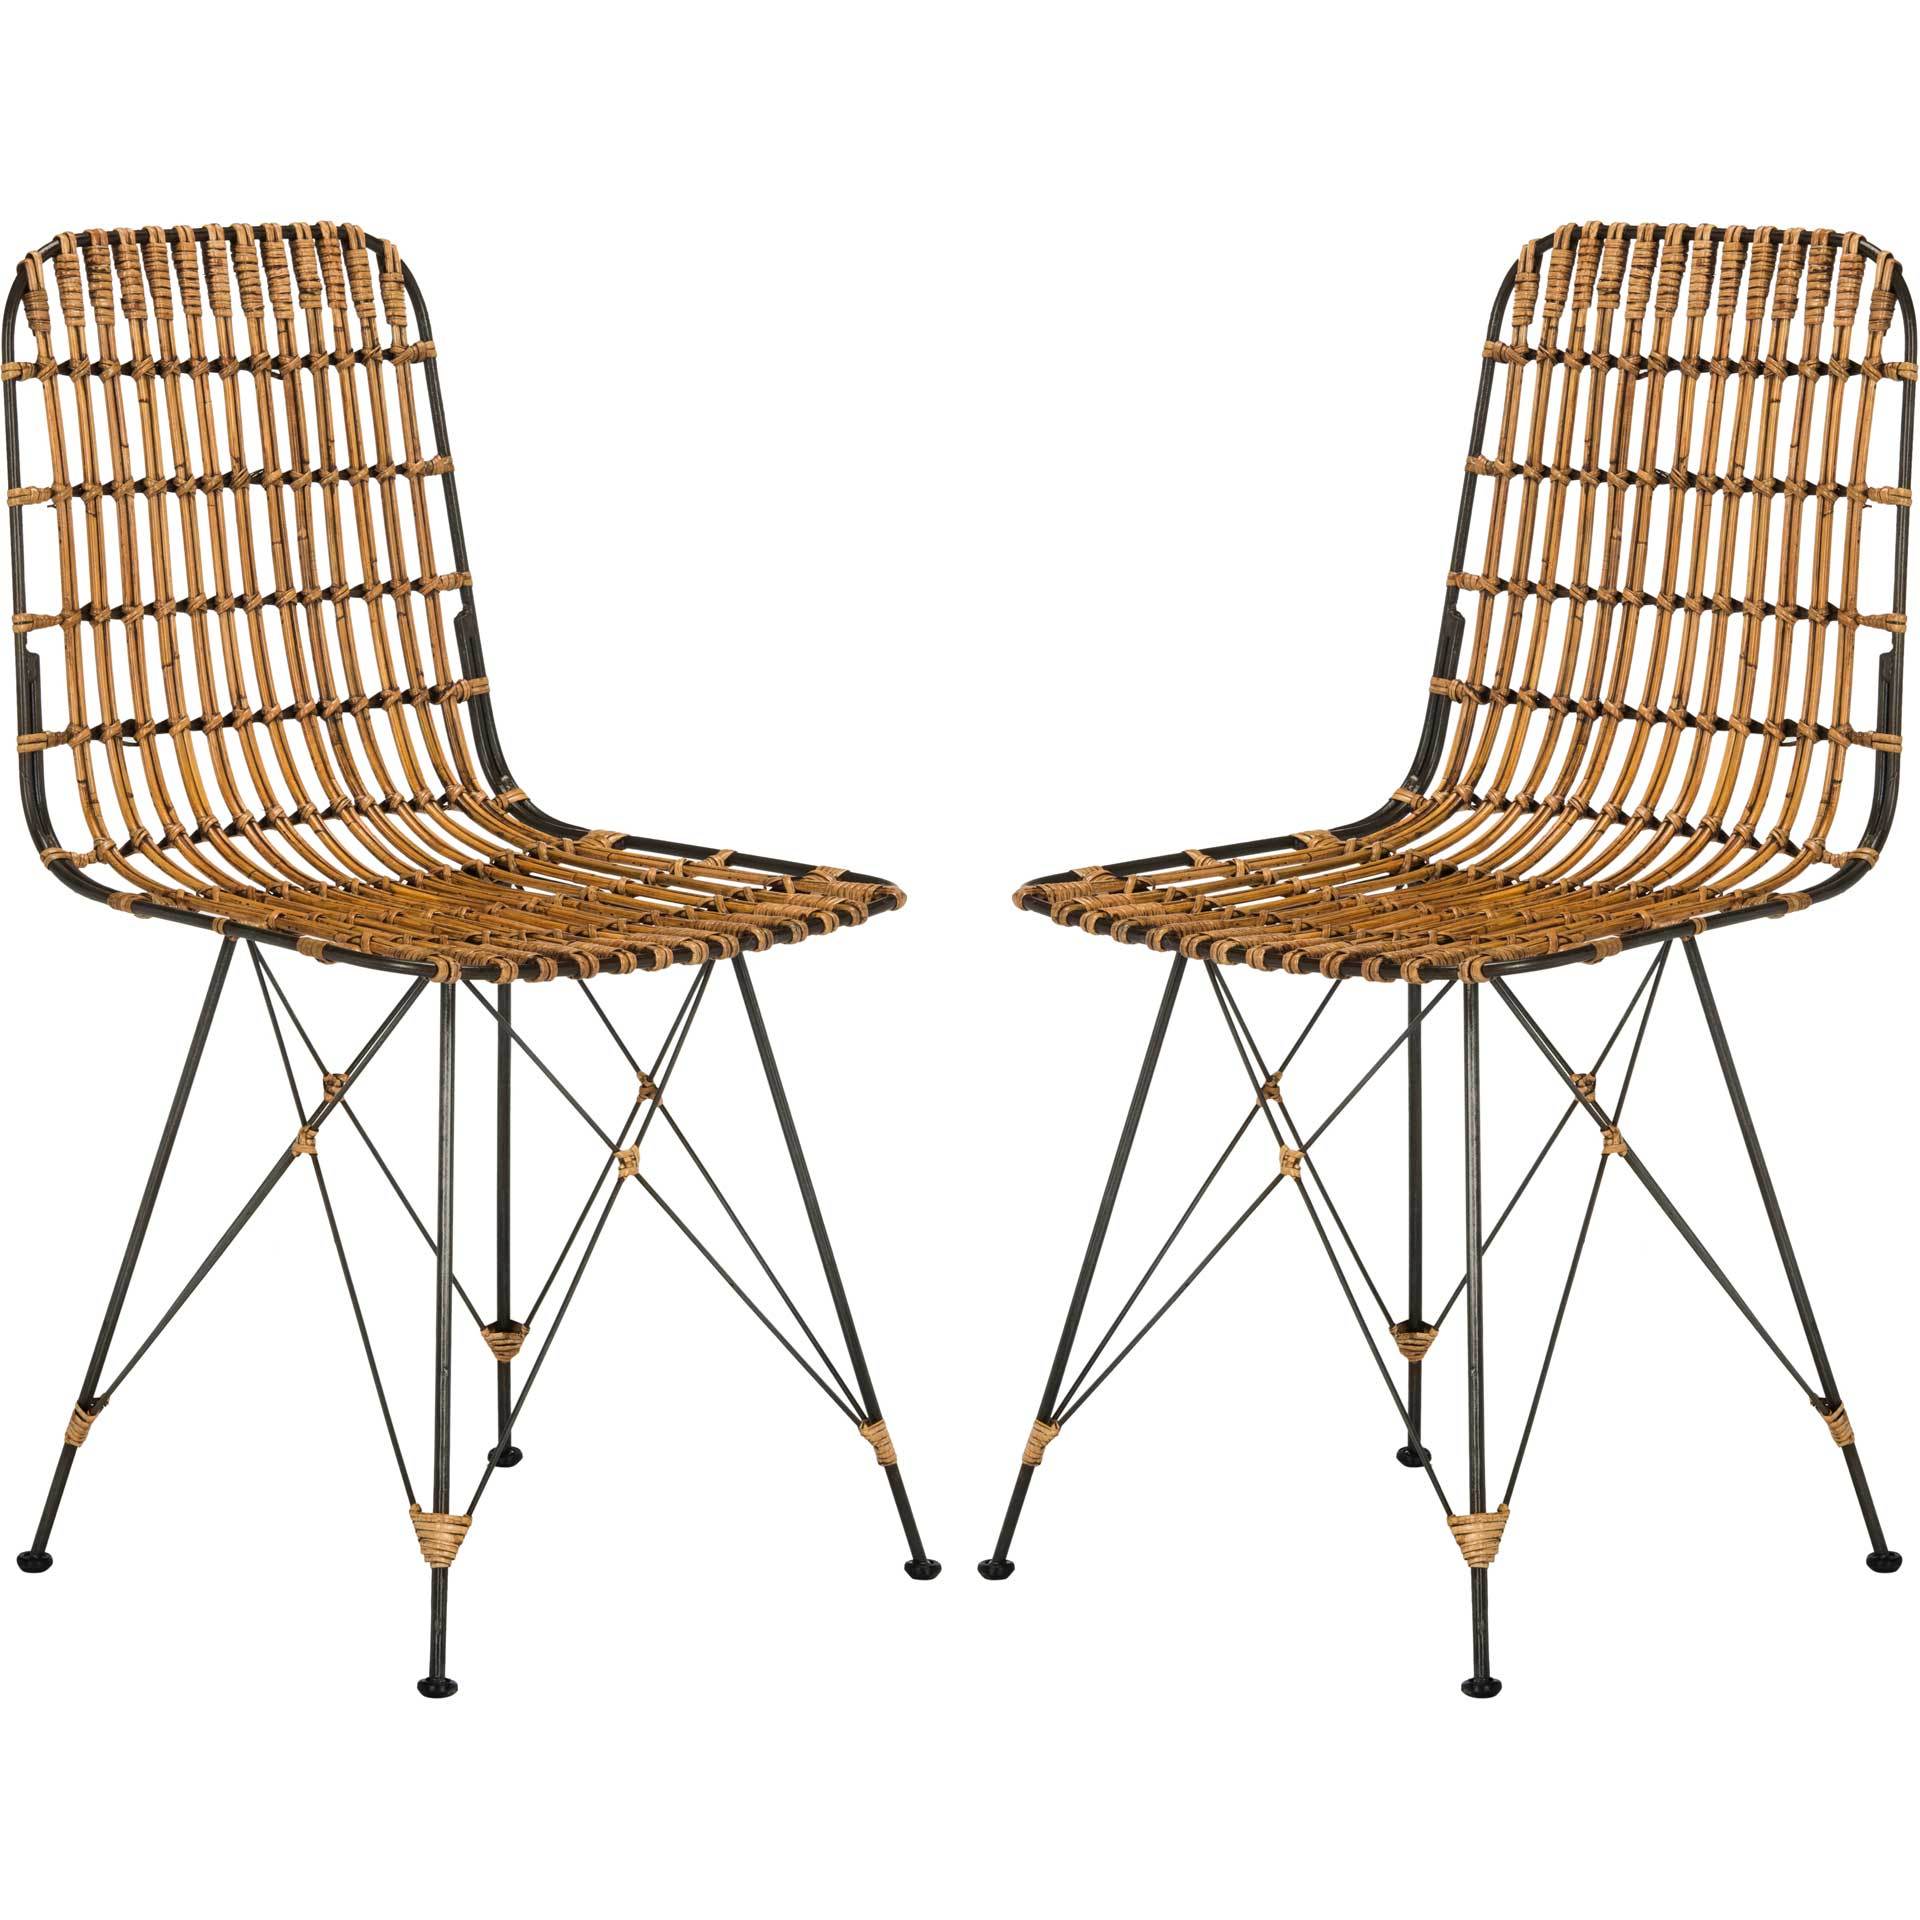 Millie Wicker Dining Chair Natural Brown Wash (Set of 2)